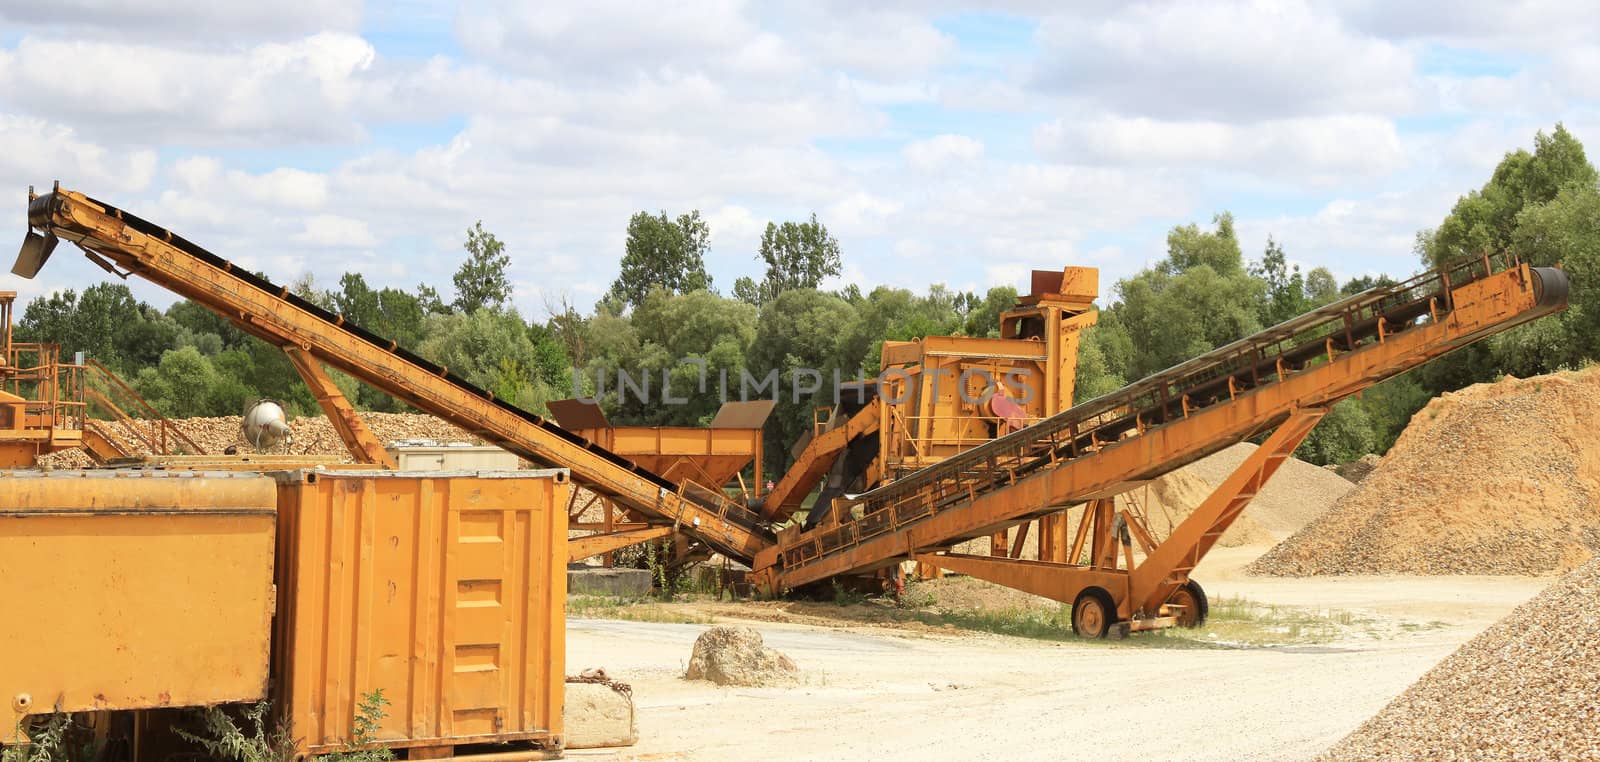 panoramic photograph of a sand and gravel pit